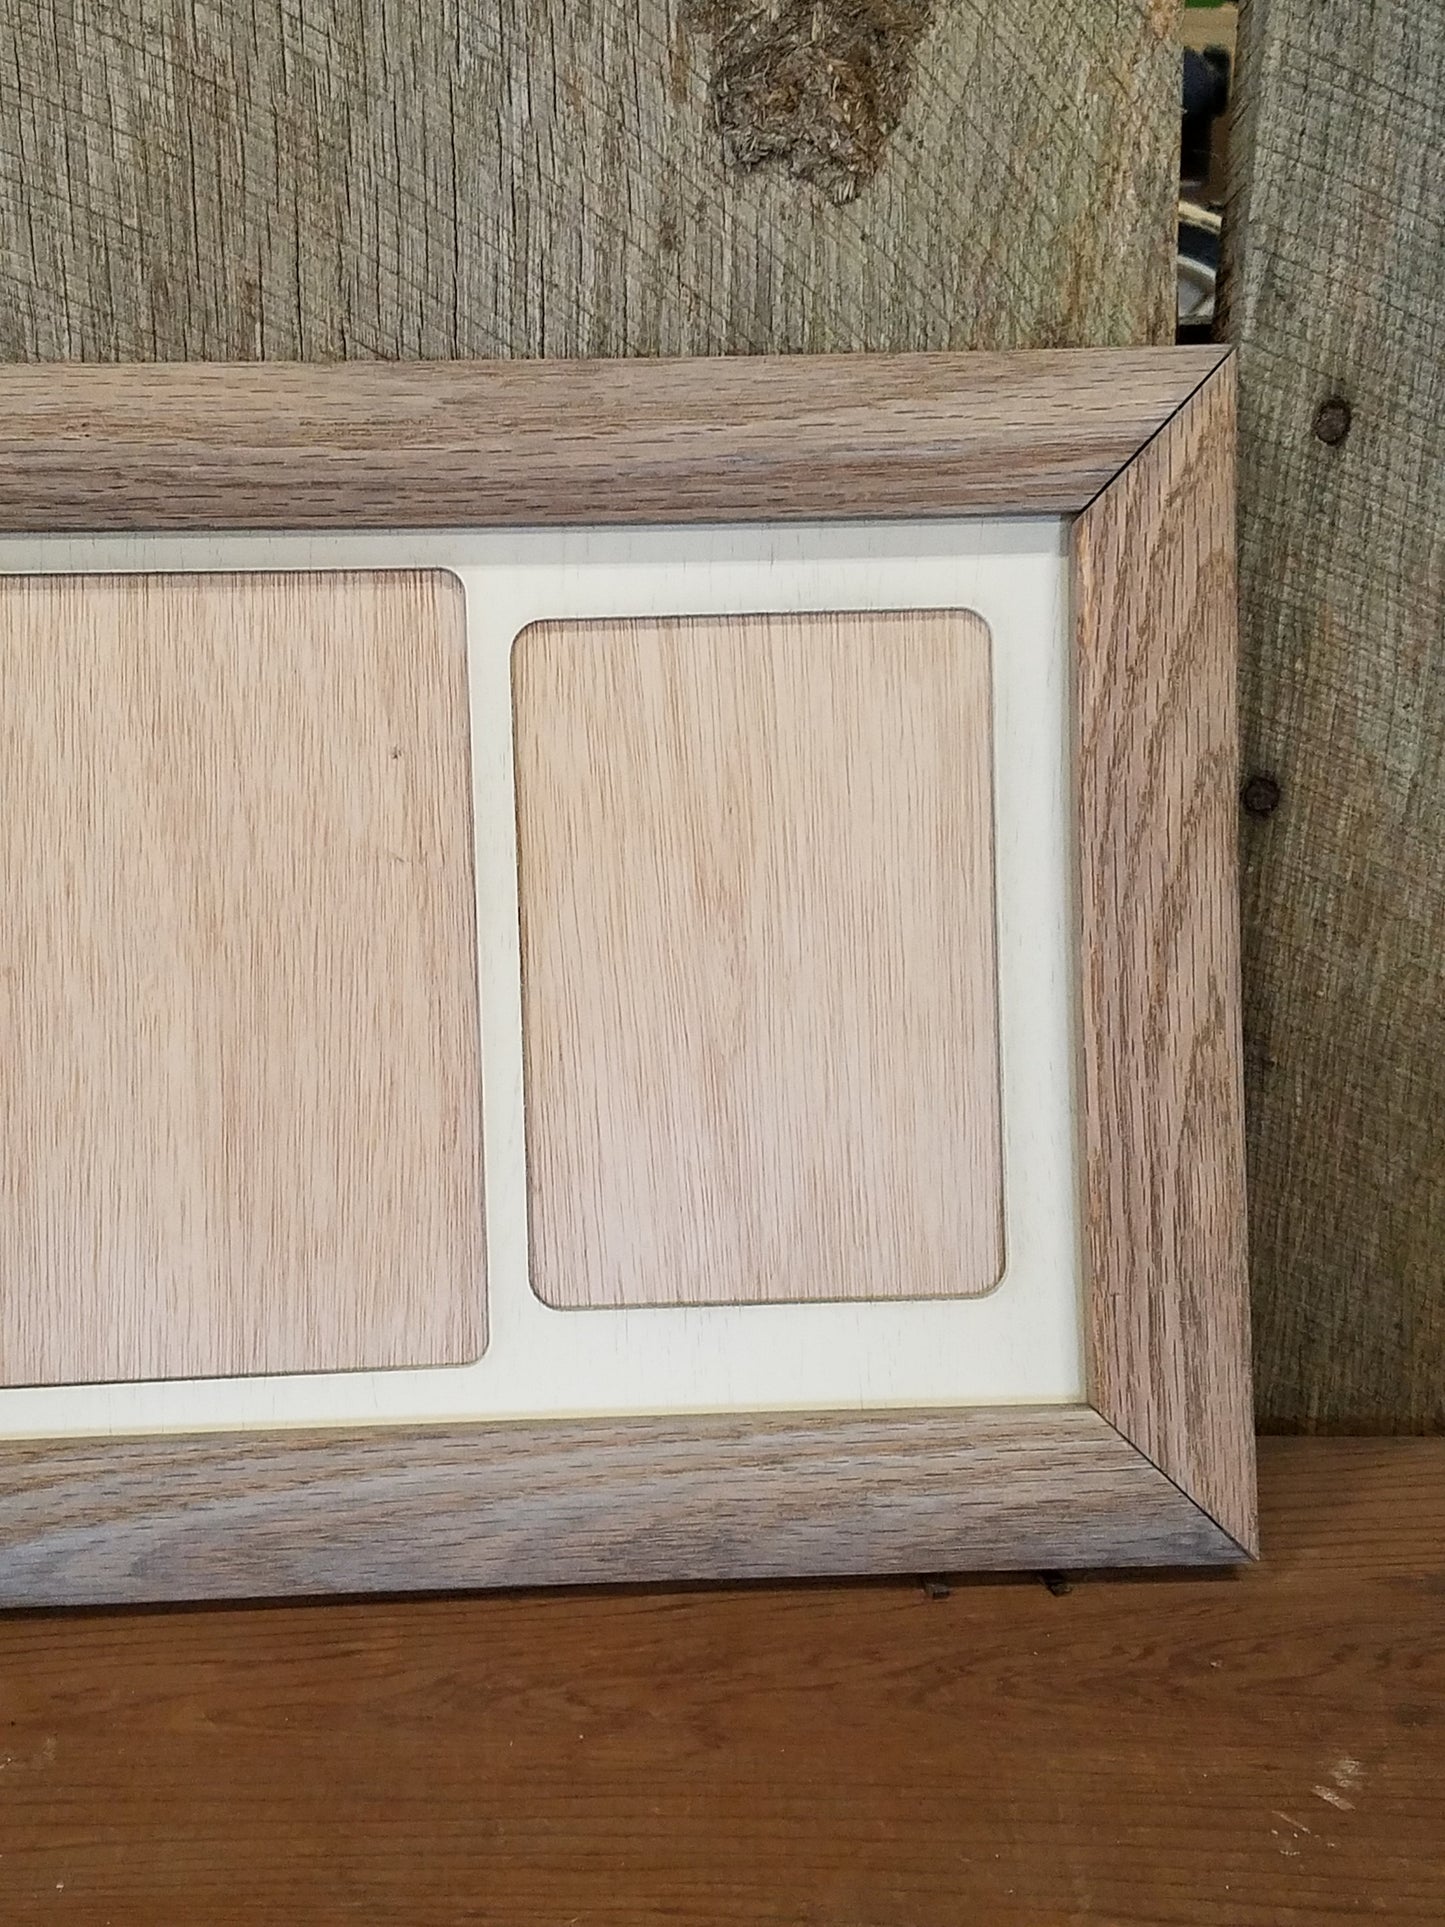 Farmhouse, 8x10, 5x7, College, Picture Frame, Mat, Mat-board, Wood,, Weathered Oak, Handmade, Country, Rustic, Primitive, Multiple